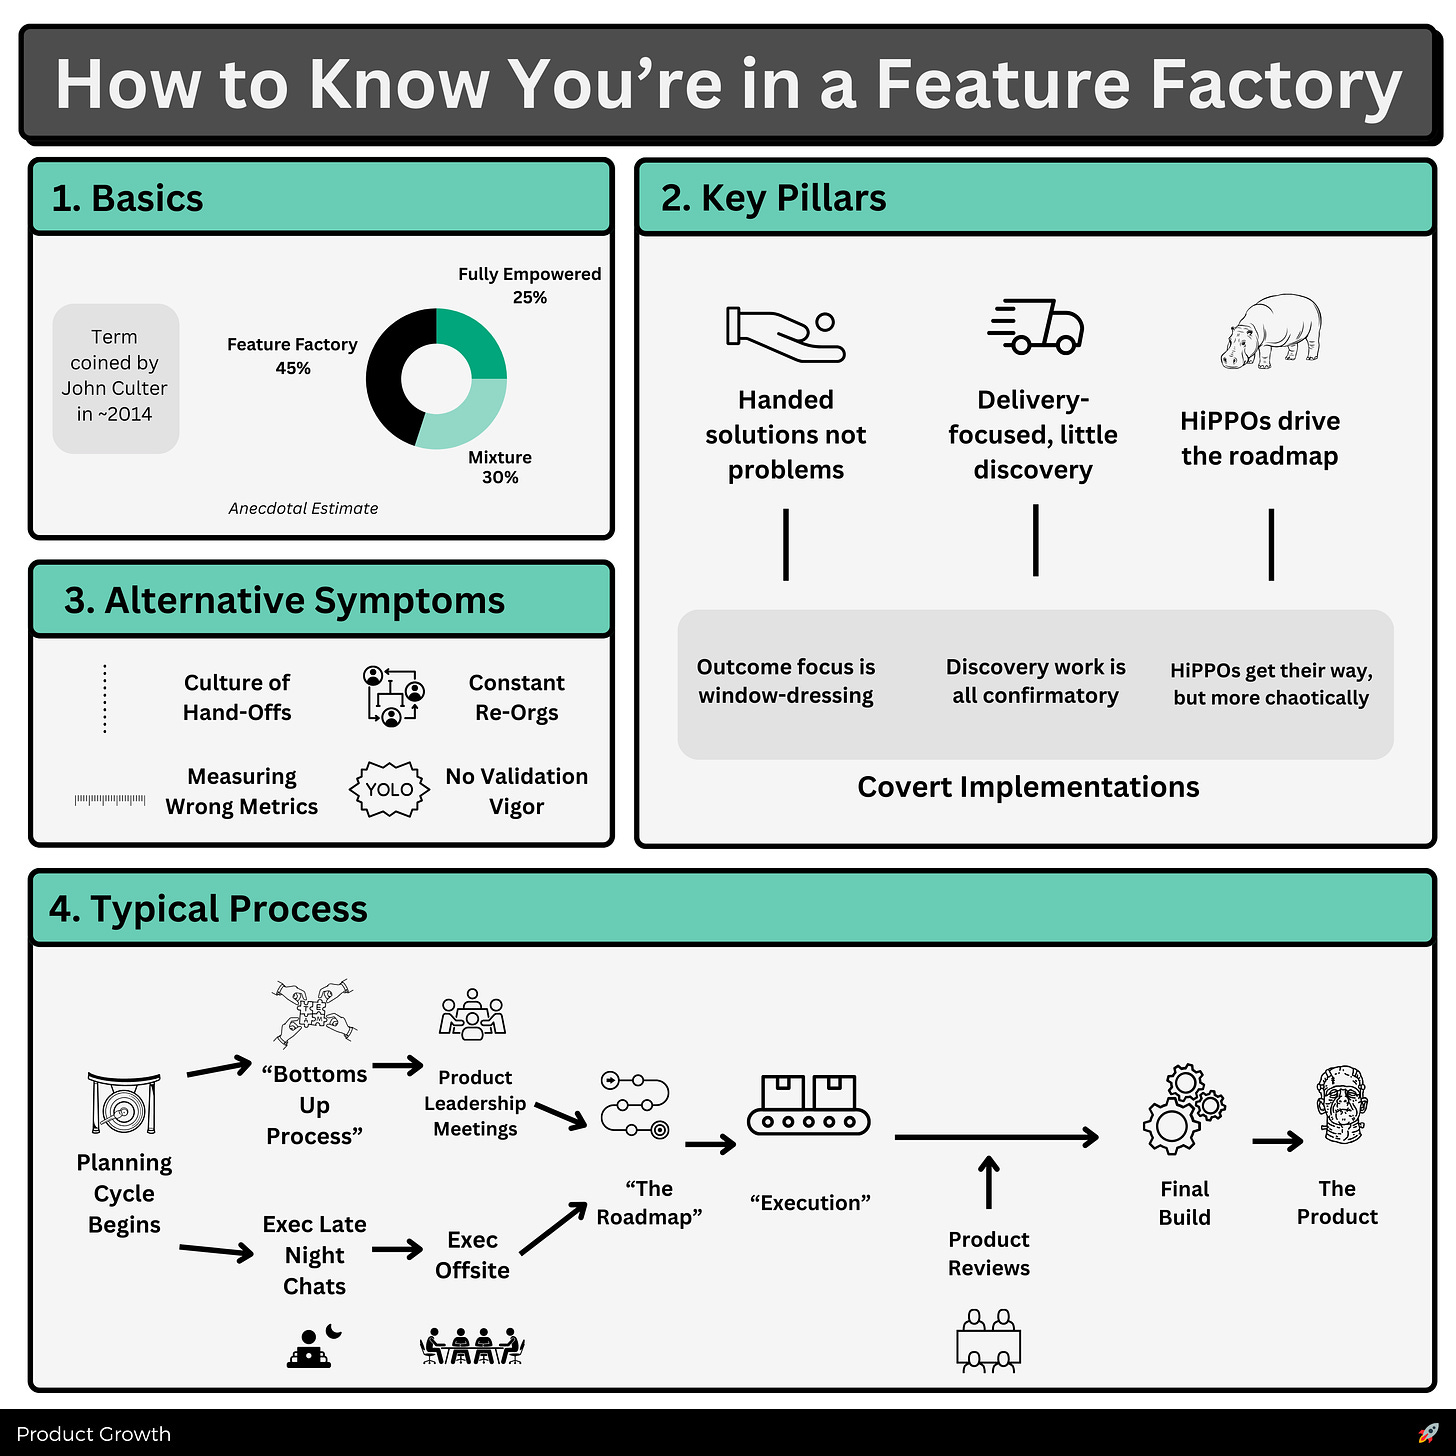 How to know you're in a feature factory